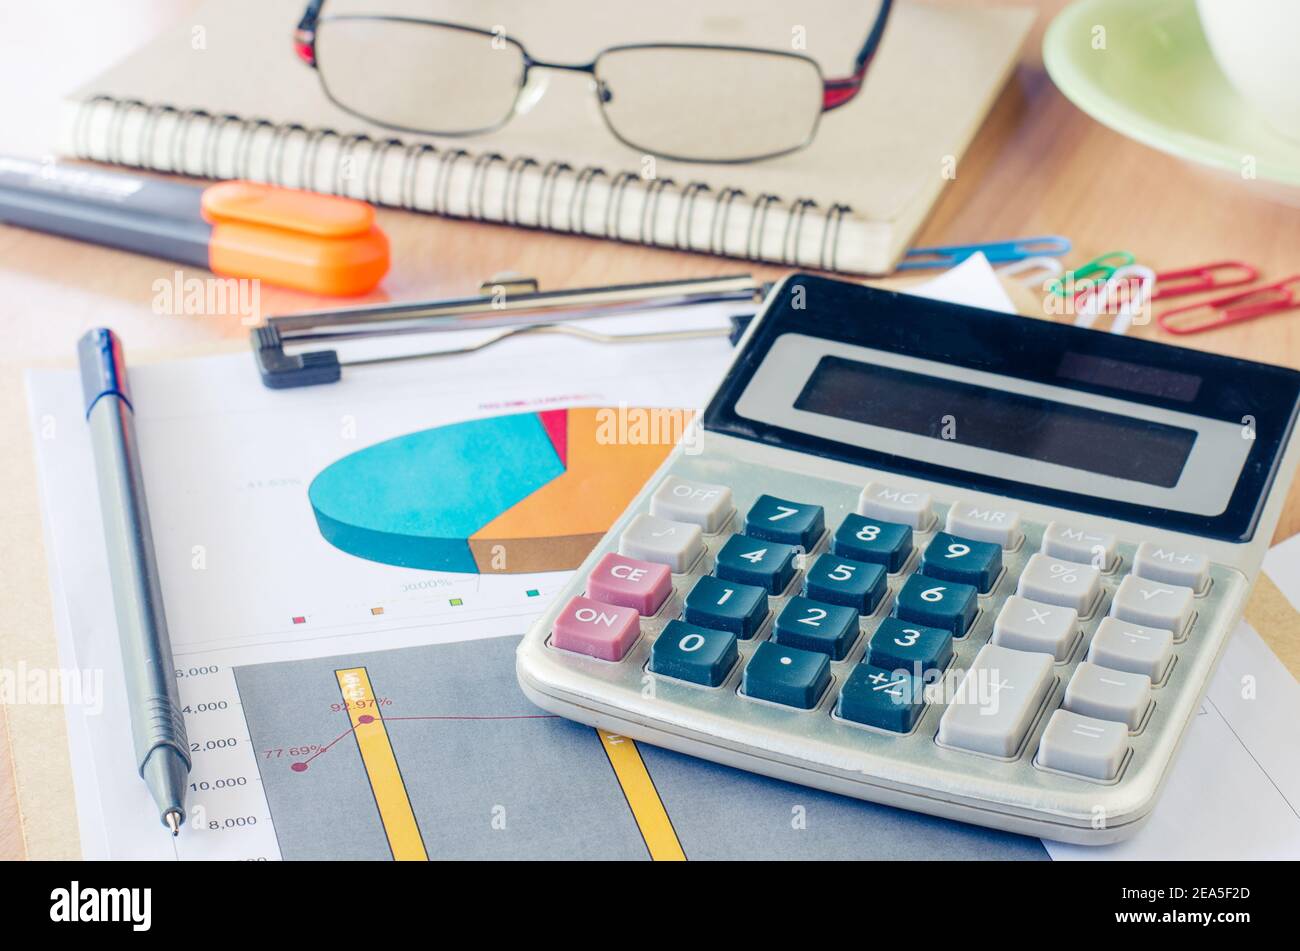 Data Graphing Calculator, pen, glasses and a cup of coffee and put on your desk. Stock Photo